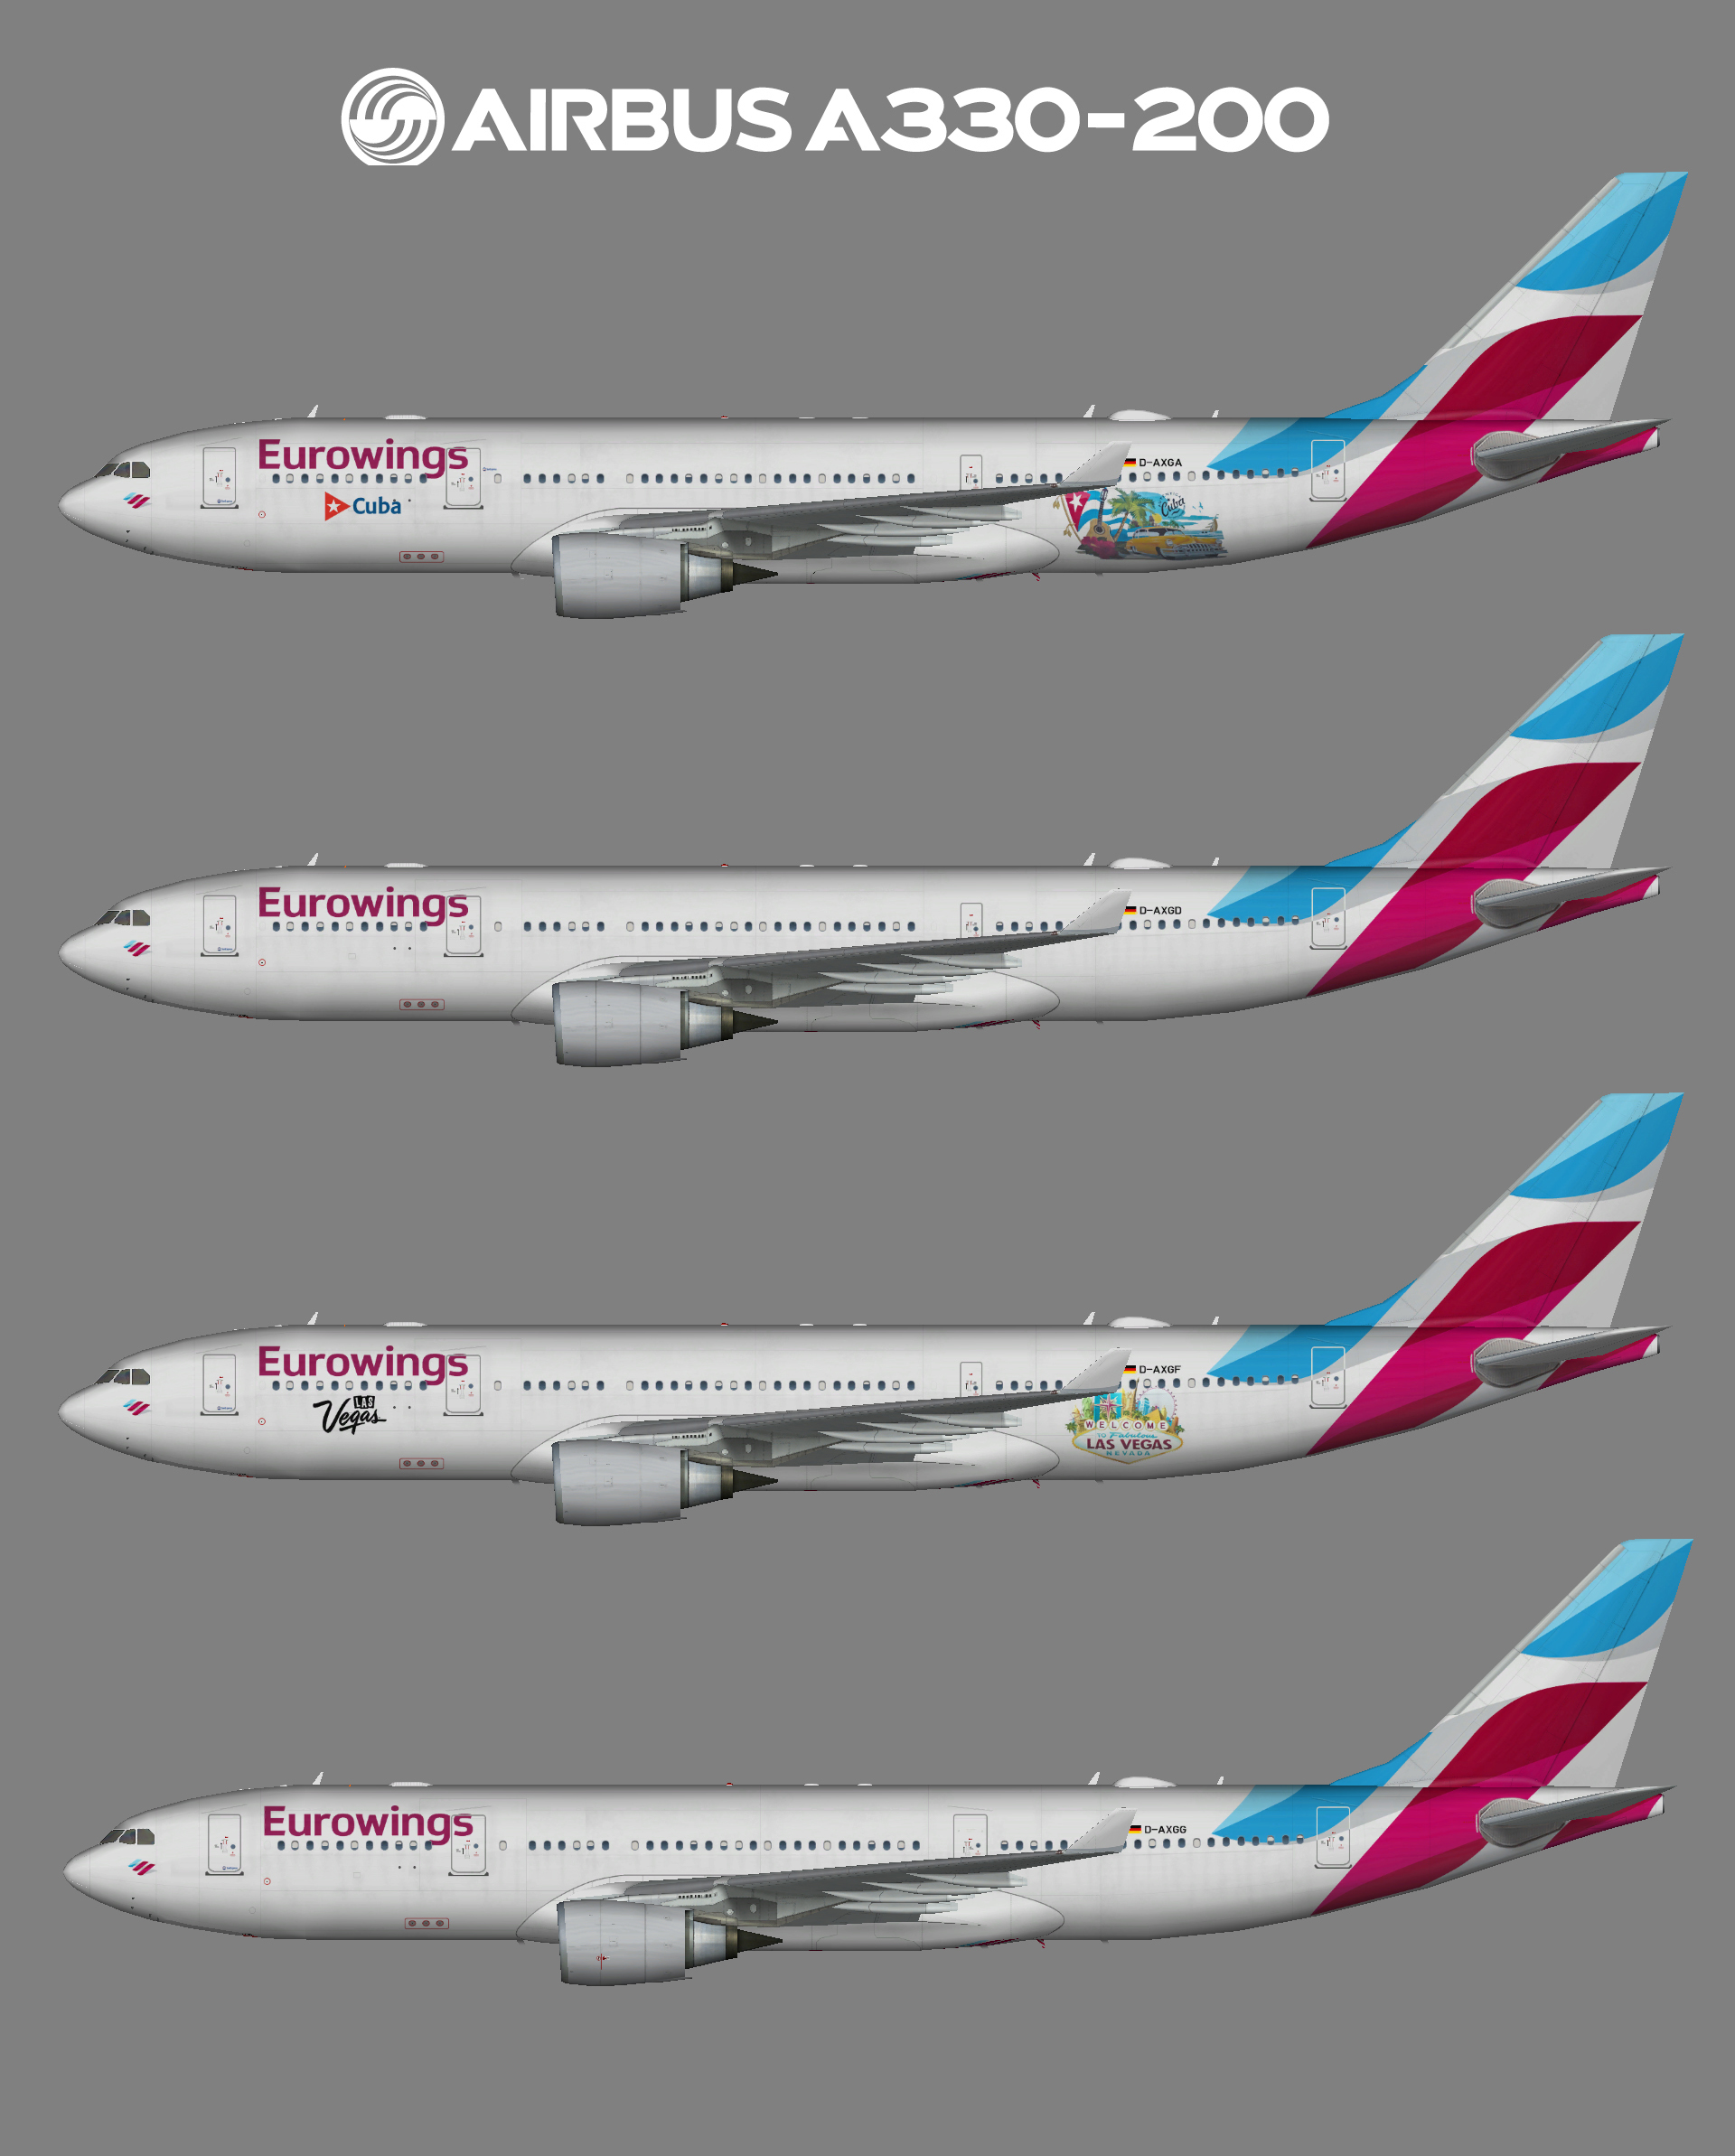 Eurowings Airbus A330-200 (FSP)